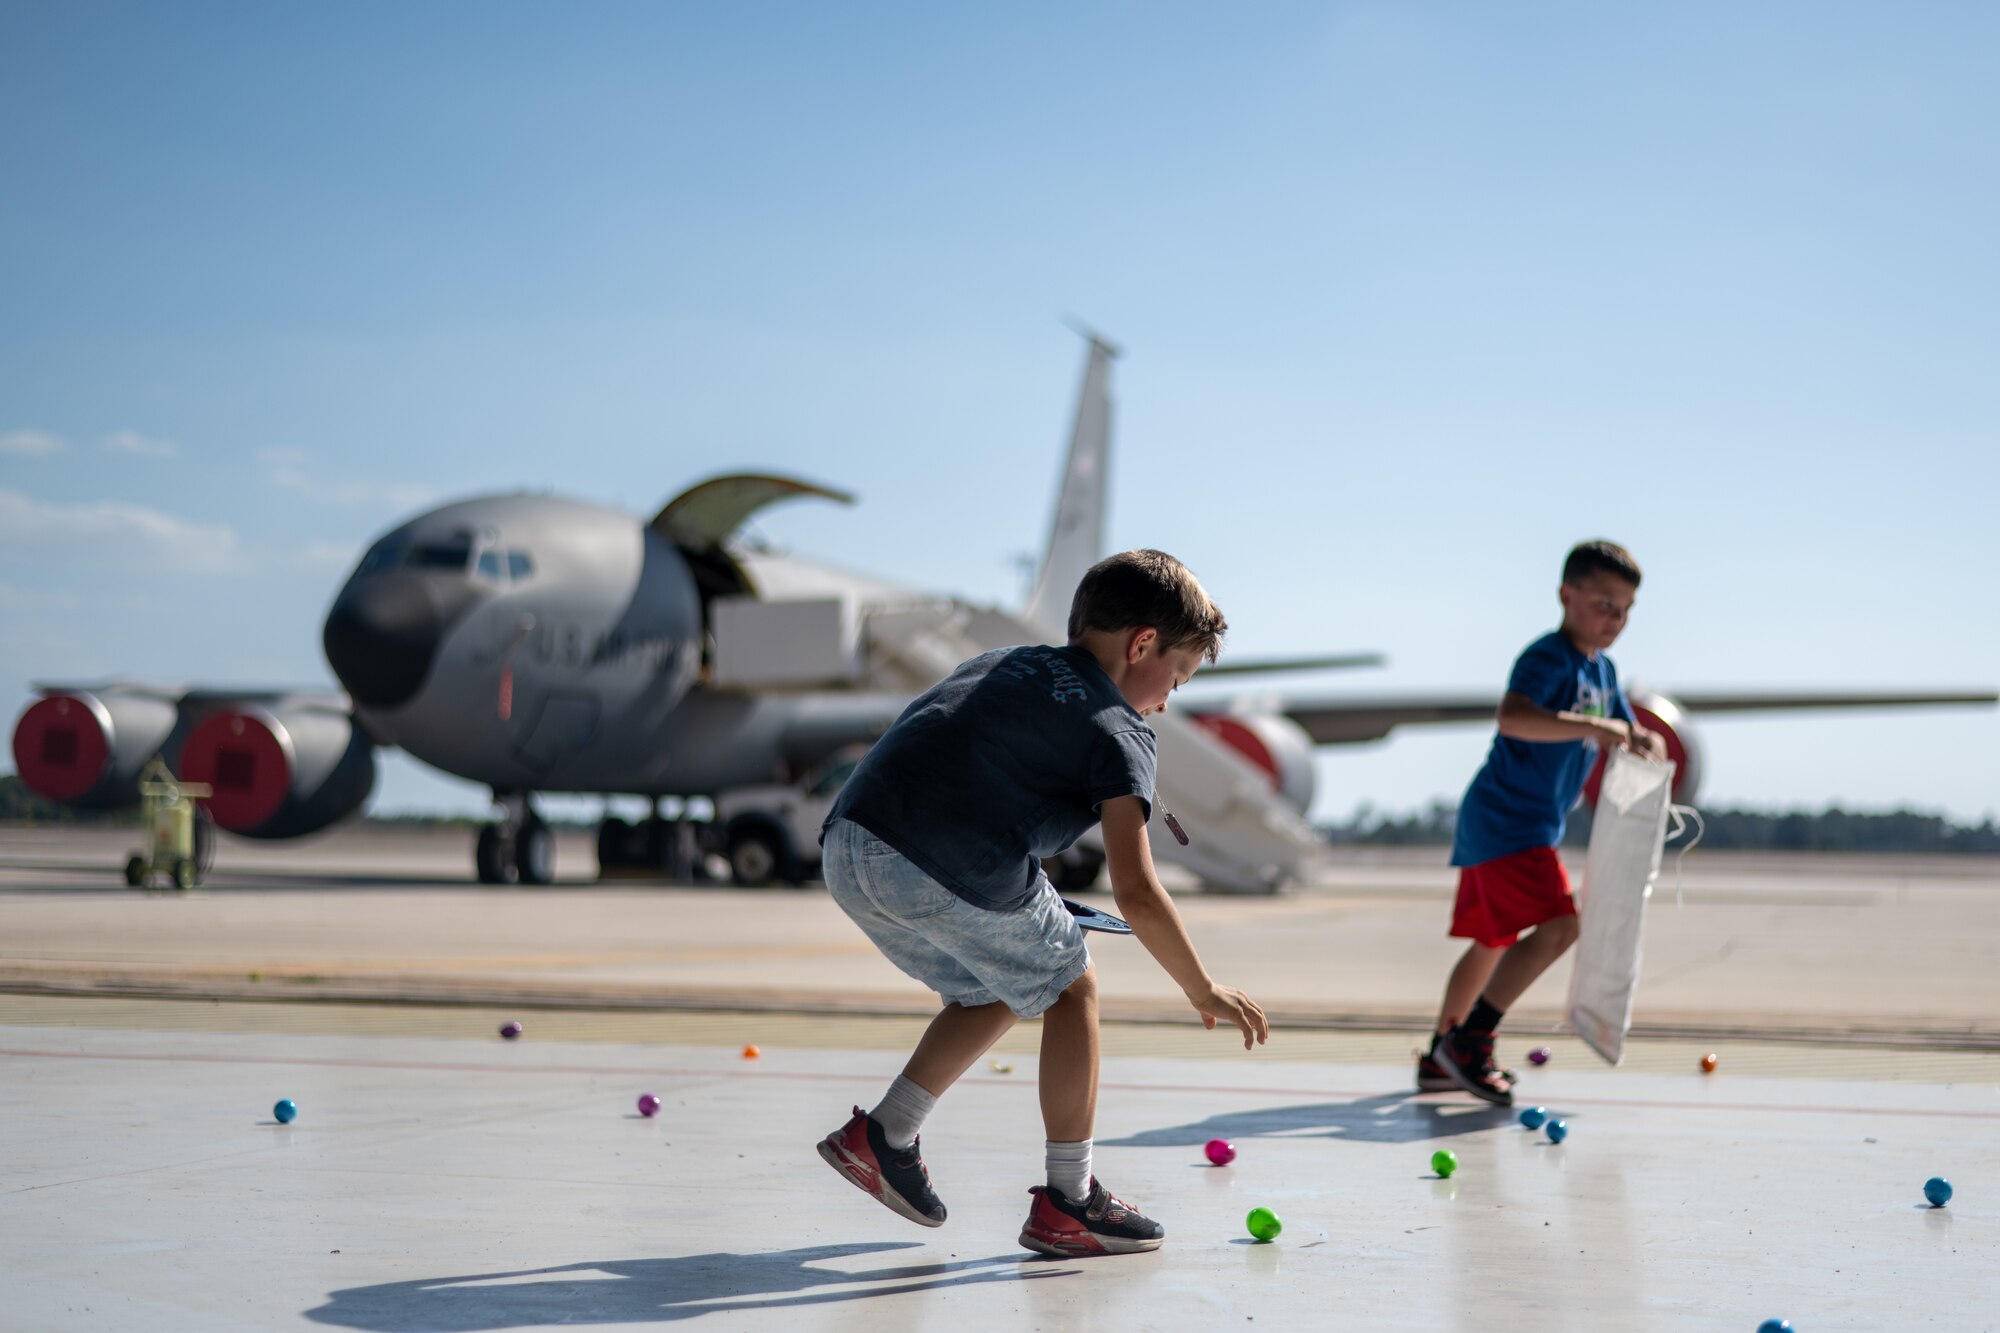 The event served as an opportunity for Airmen and their families to decompress following their recent deployments. (U.S. Air Force photo by Airman 1st Class Zachary Foster)